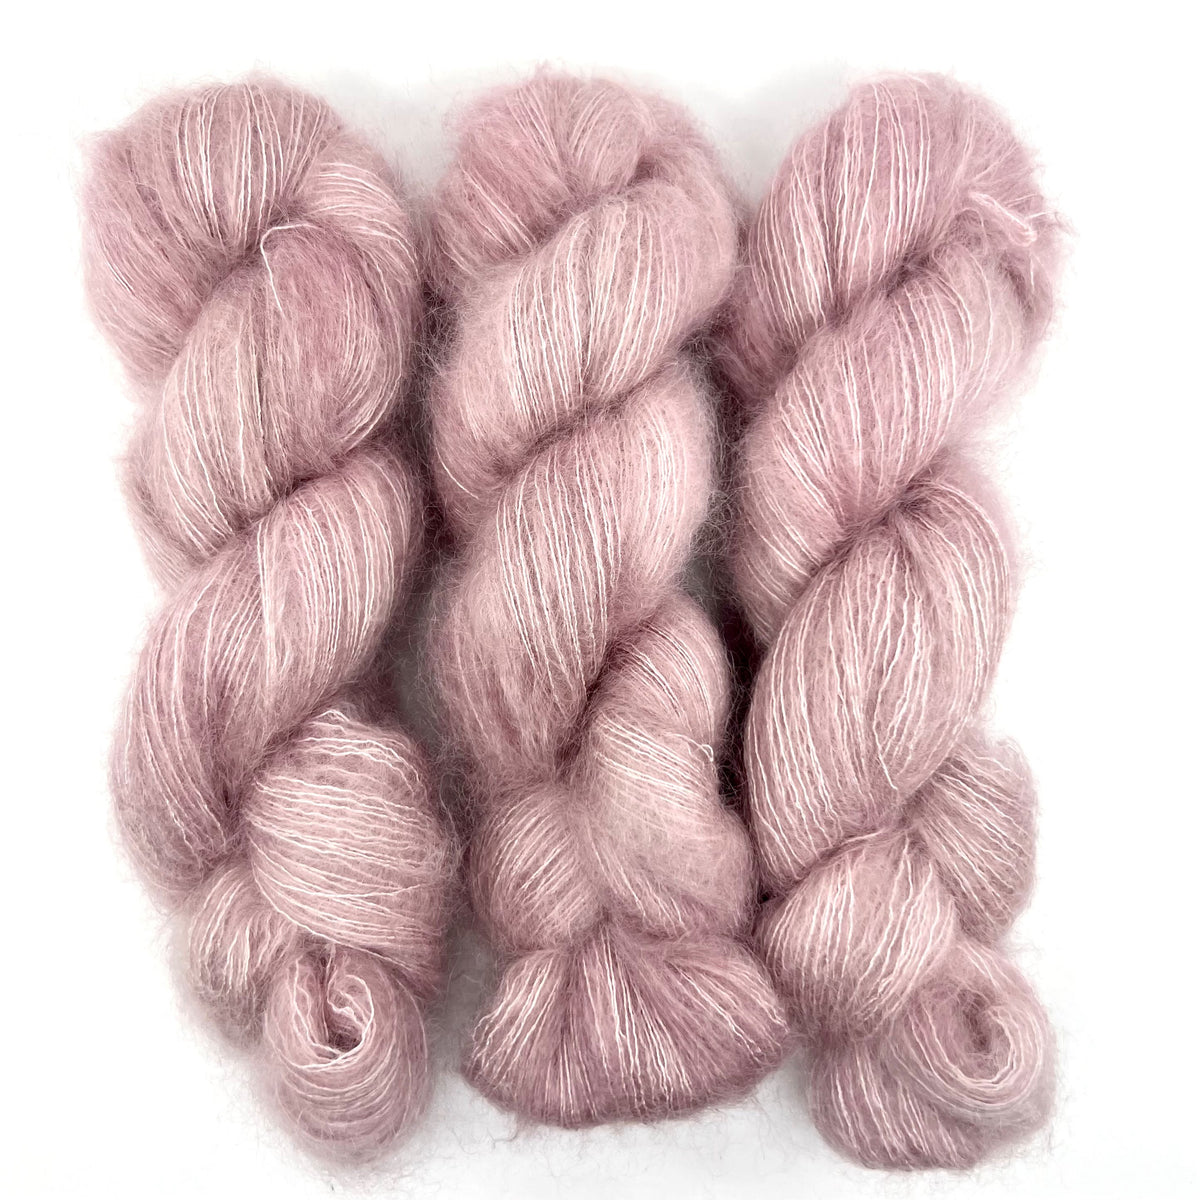 Dusty Rose - Delicacy Lace - Dyed Stock